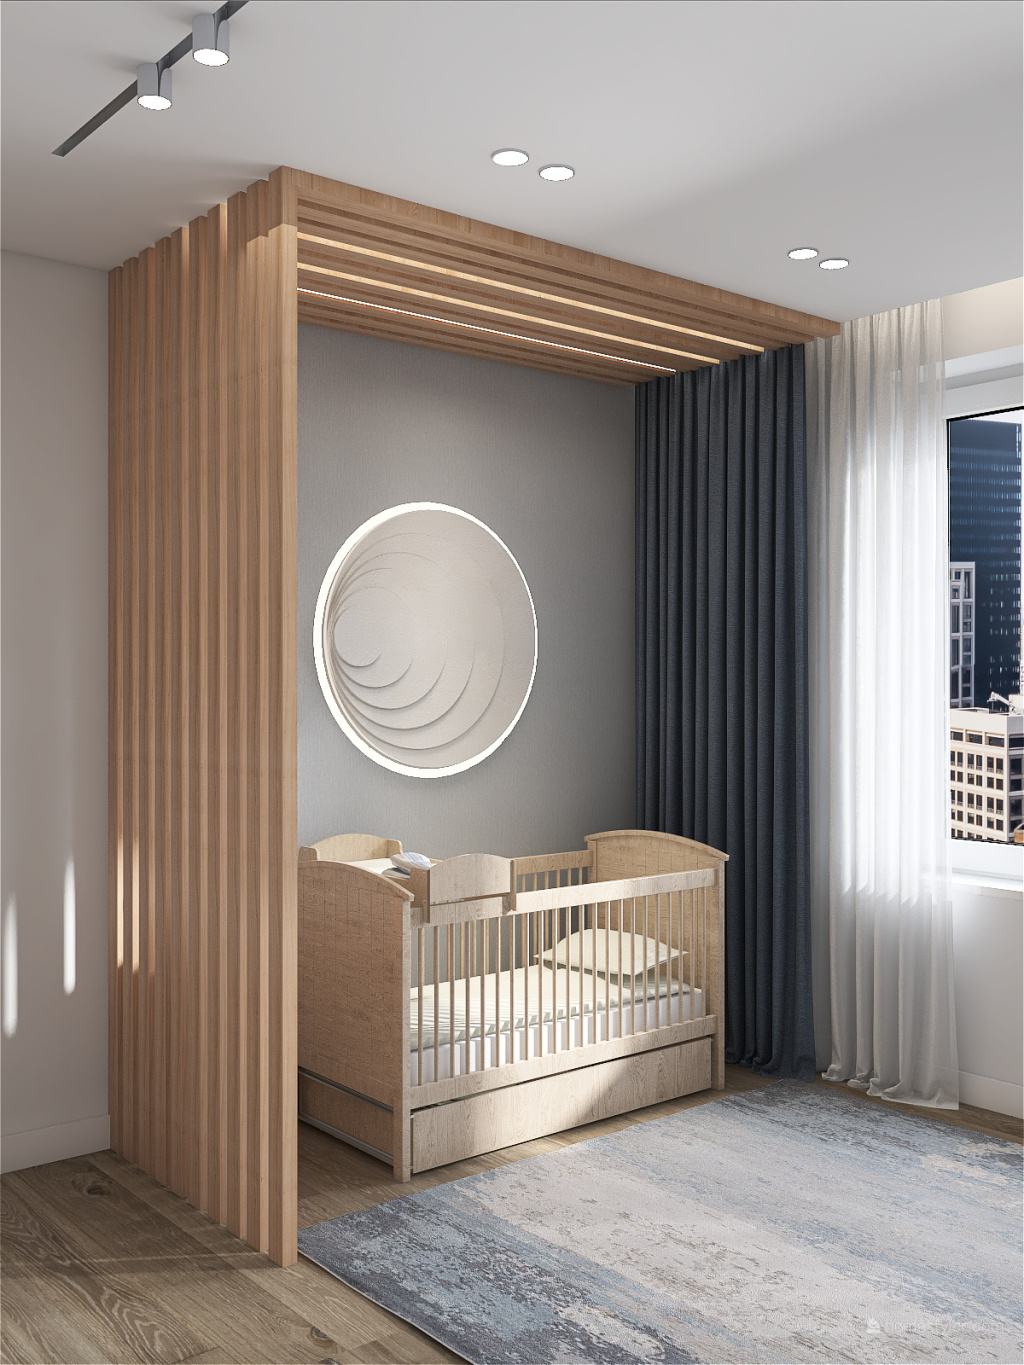 Two-room flat for a young family 3d design renderings